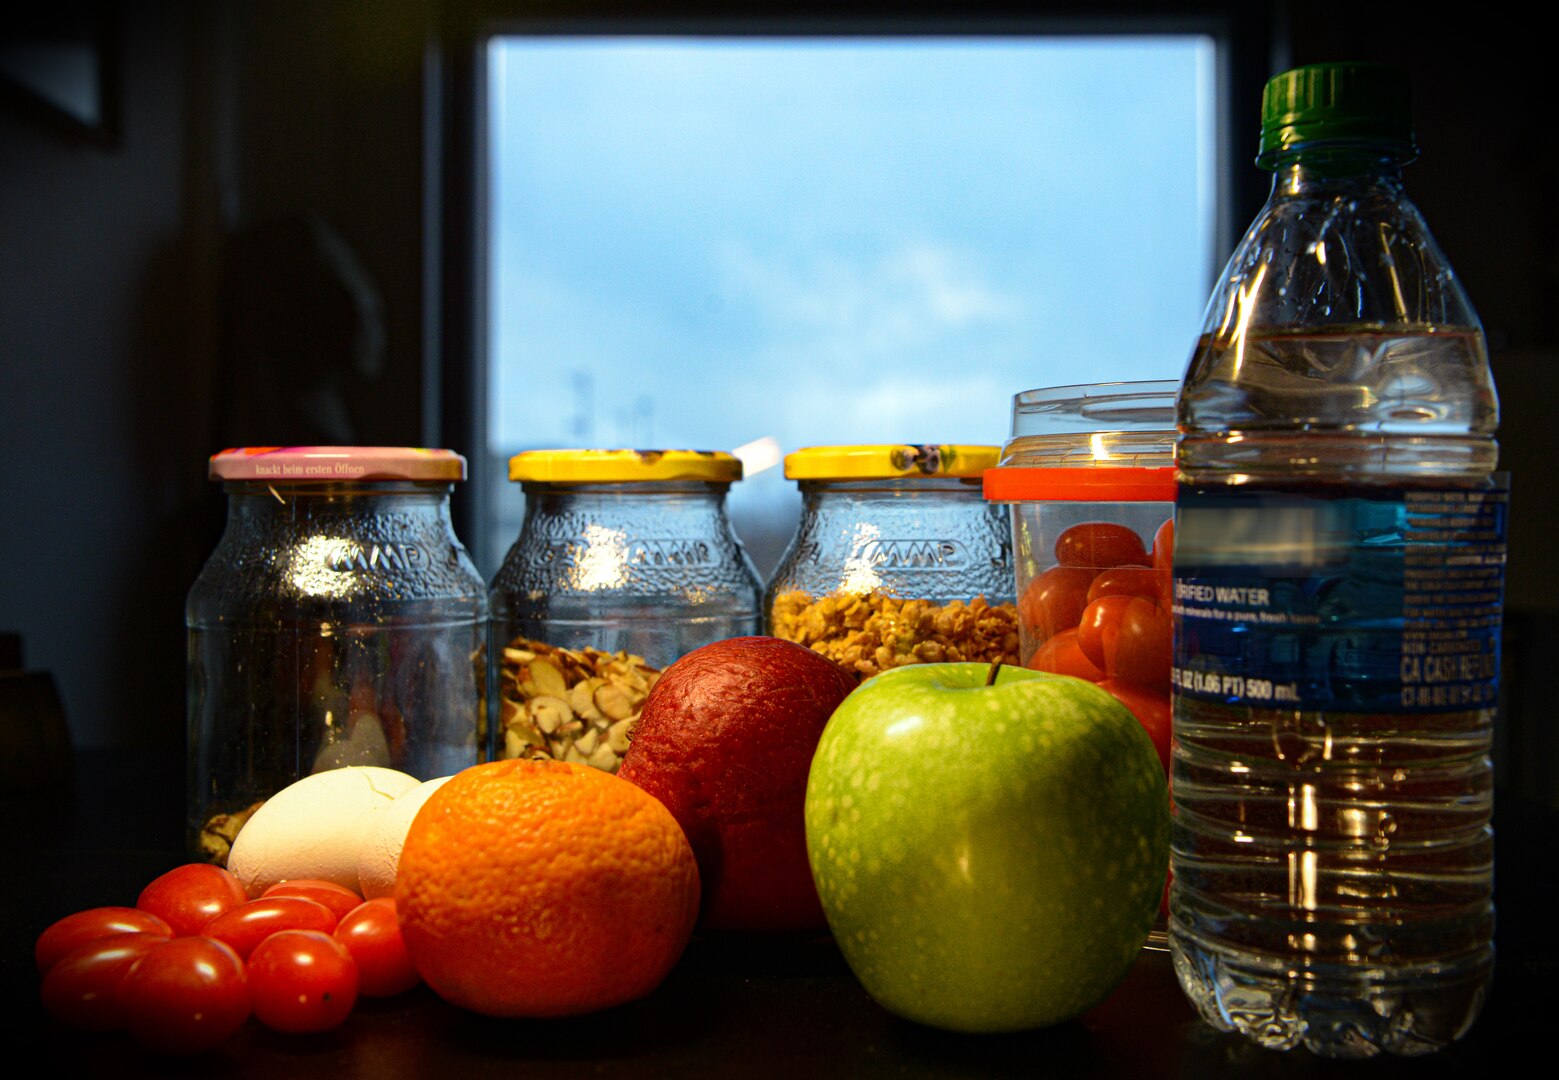 A display of fruits, vegetables, nuts and water, as shown at Ramstein Air Base, Germany, Jan. 10, 2020.